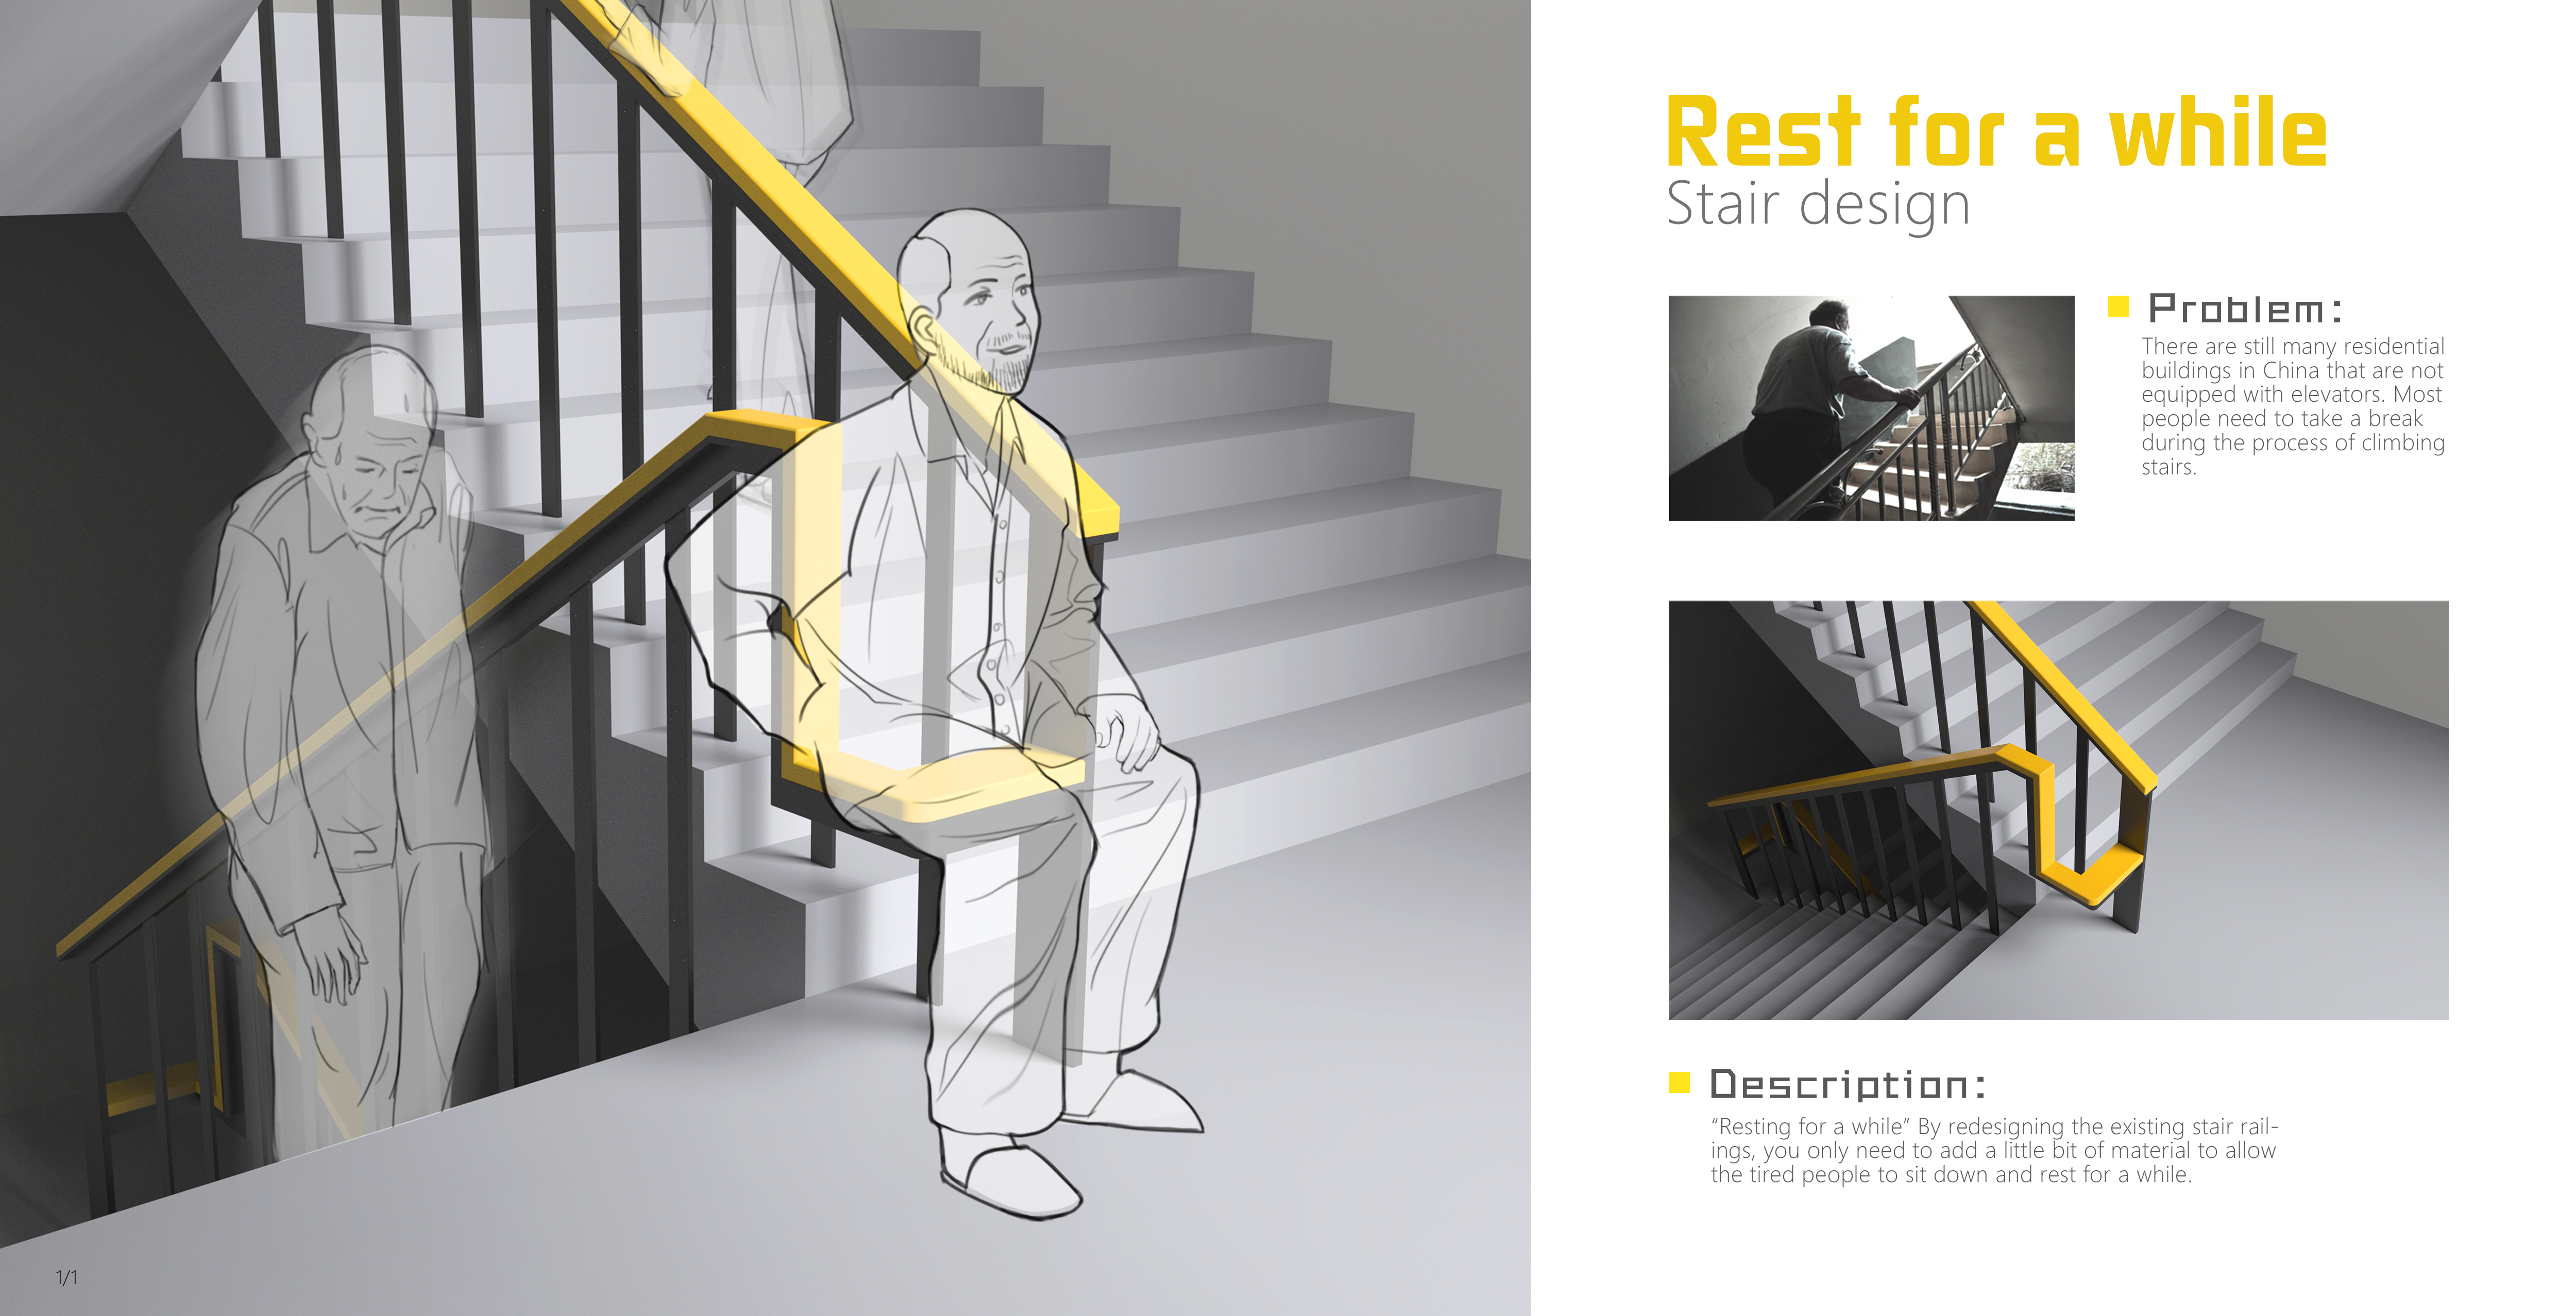 Rest for a while - Stair design